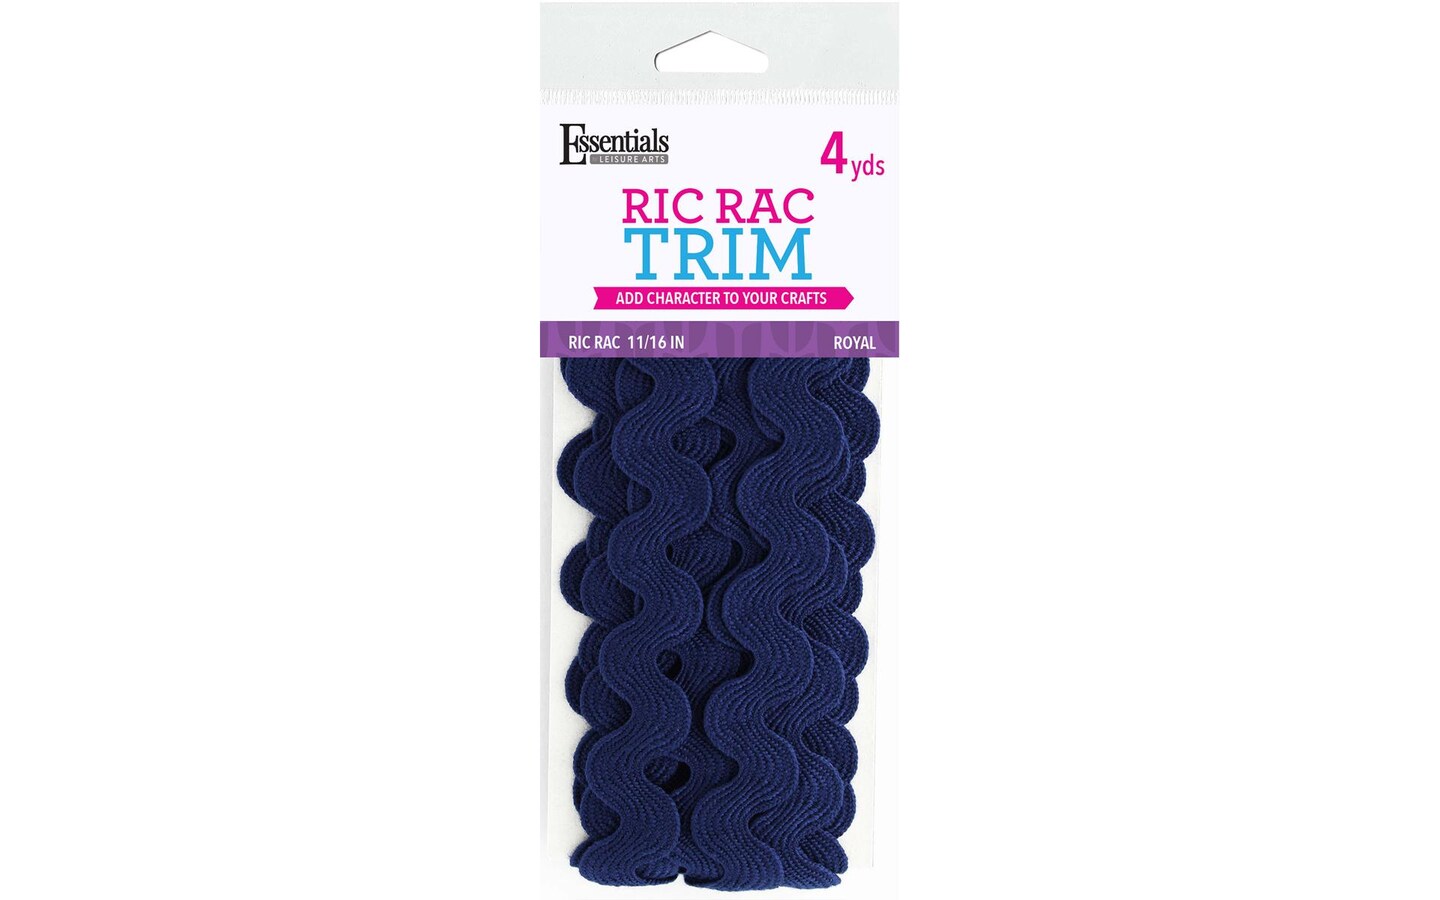 Essentials By Leisure Arts Ric Rac 11/16 4 yards Royal - rick rack trim  for sewing - wavy ric rac trim for sewing and crafts - ric rac ribbon -  rick